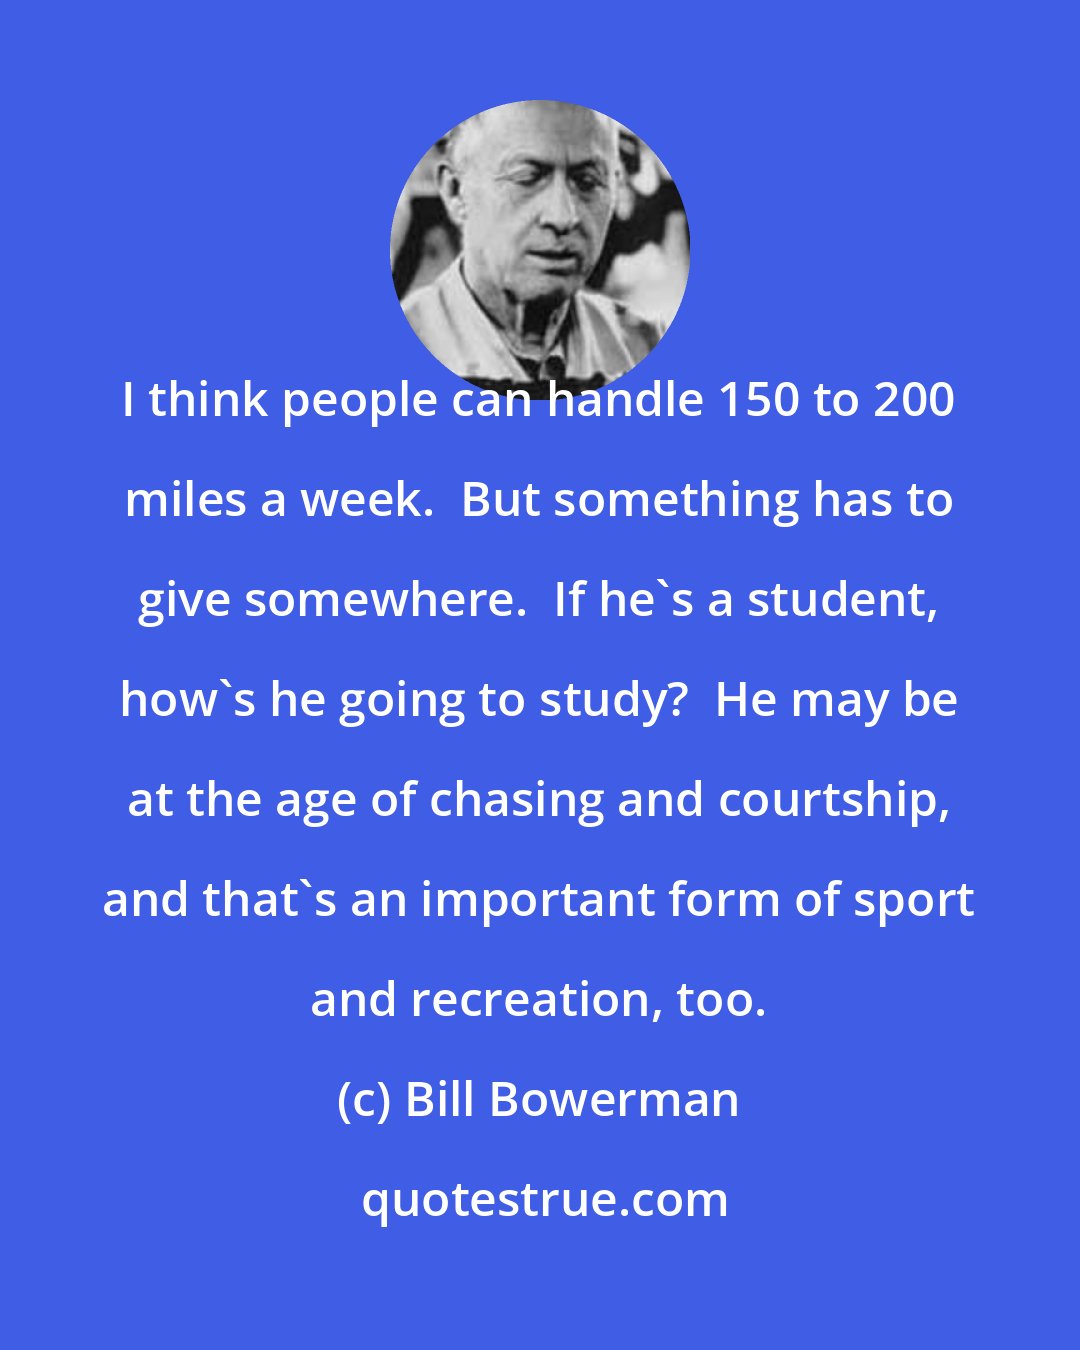 Bill Bowerman: I think people can handle 150 to 200 miles a week.  But something has to give somewhere.  If he's a student, how's he going to study?  He may be at the age of chasing and courtship, and that's an important form of sport and recreation, too.